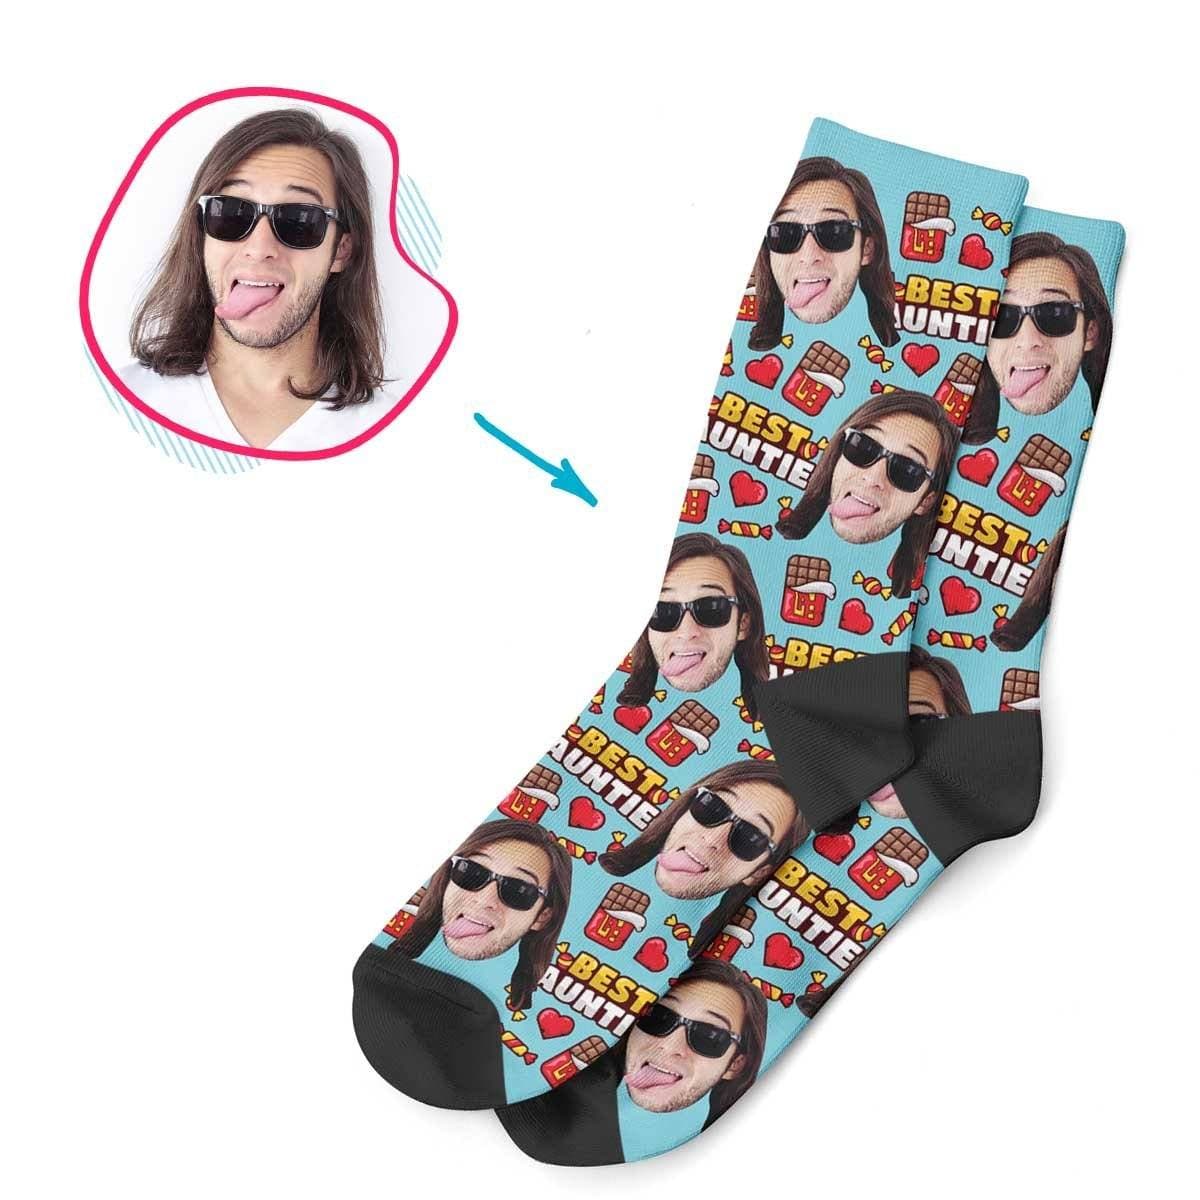 Blue Auntie personalized socks with photo of face printed on them